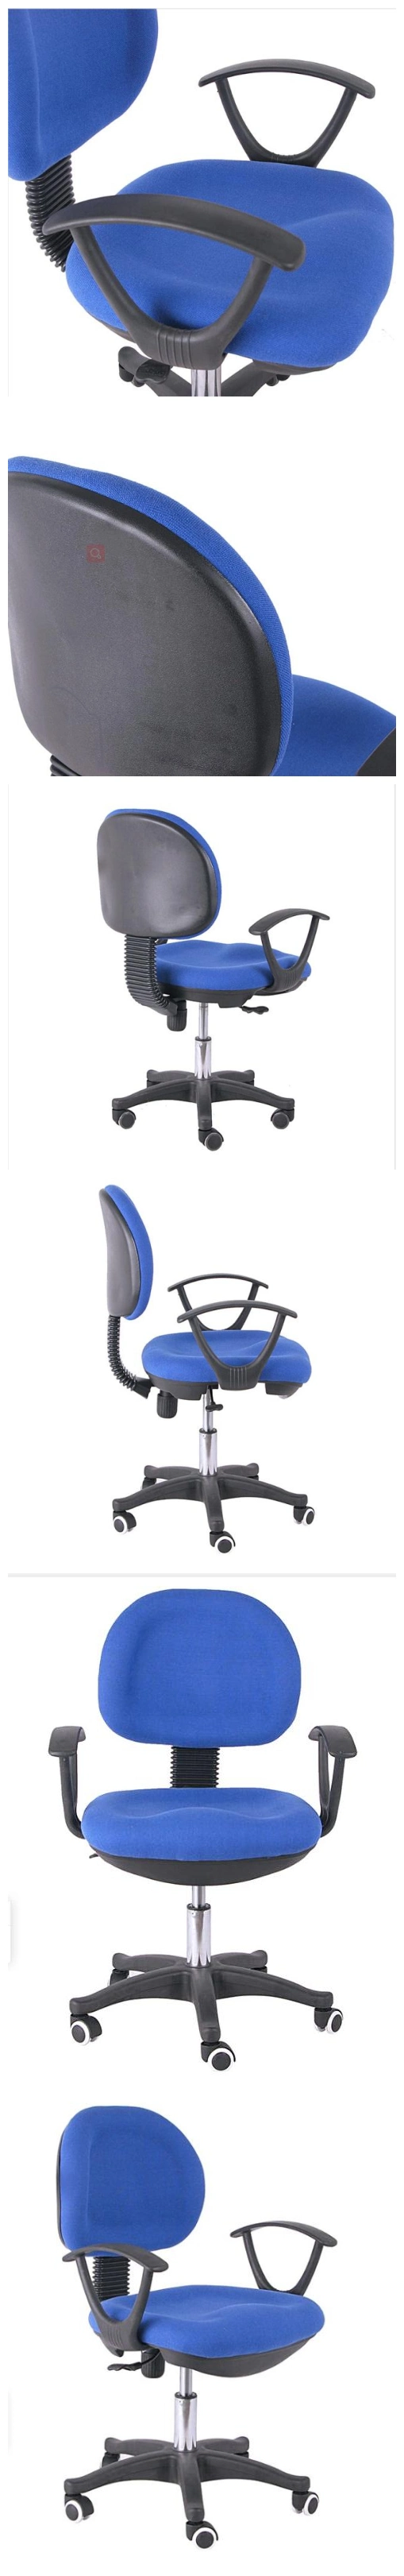 Two Handles Mechanism Fabric Office Computer Plastic Chair